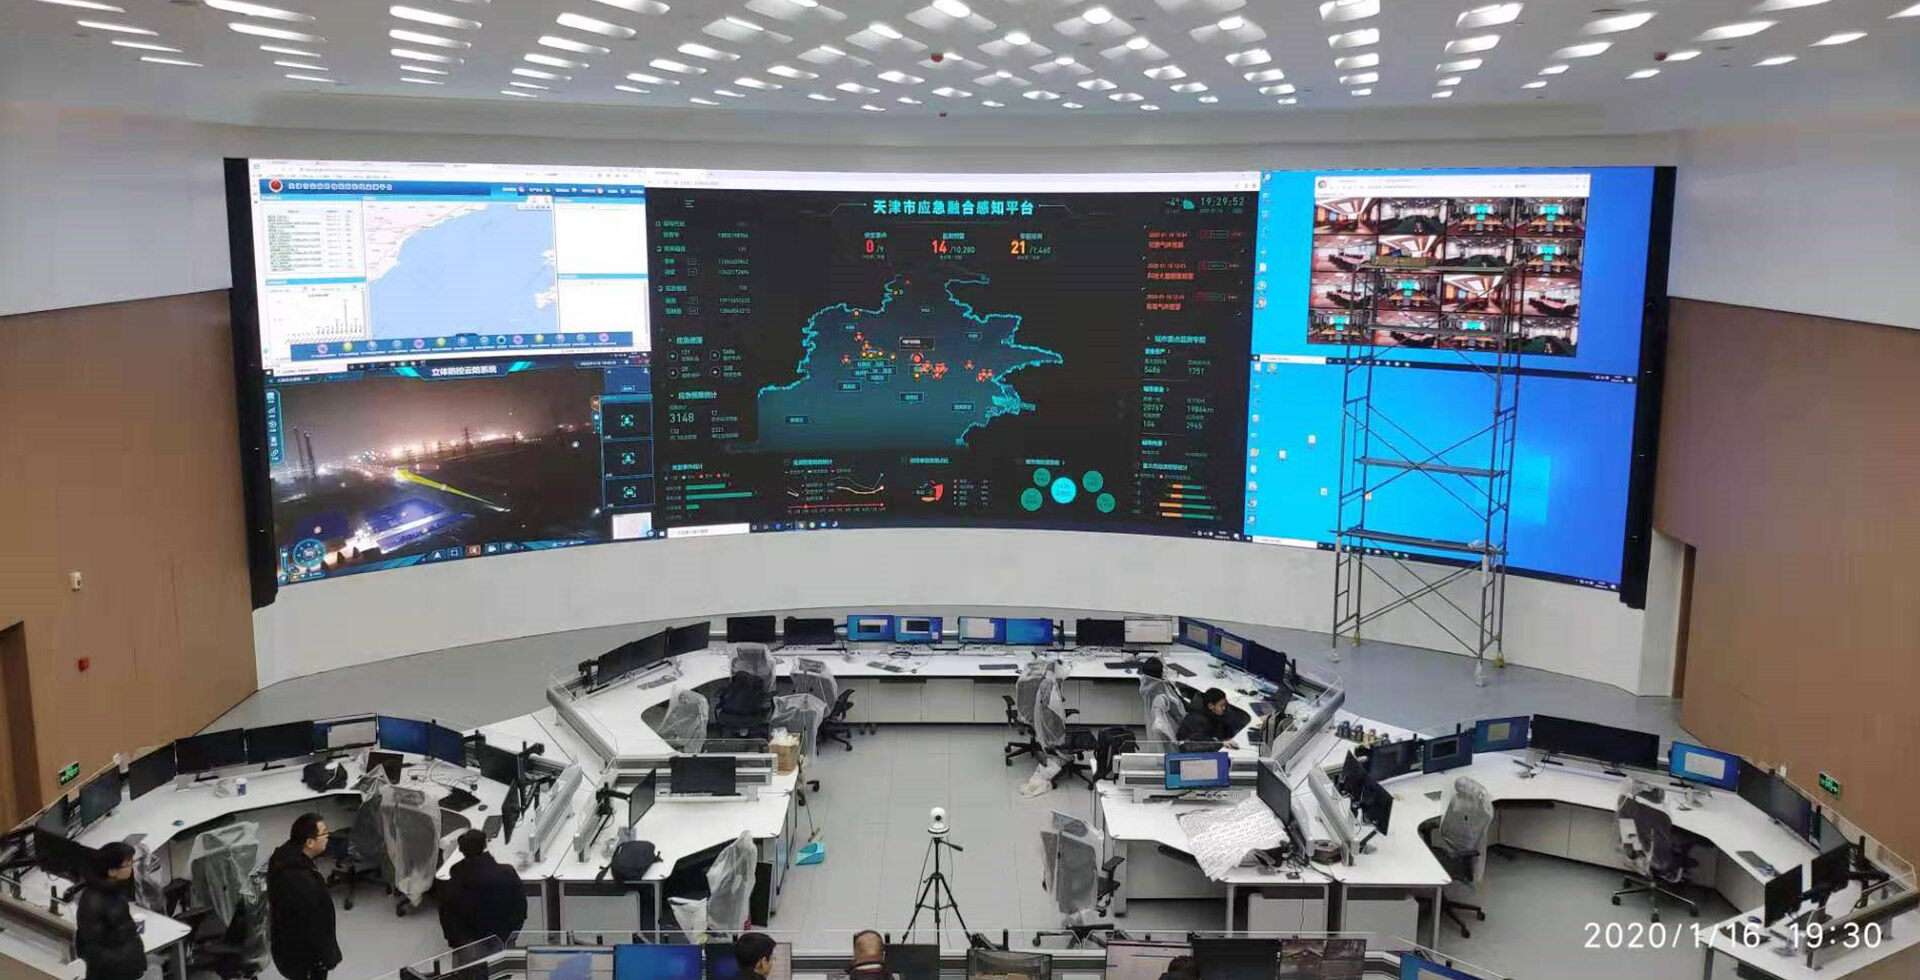 Tianjin Emergency Administration Command Center